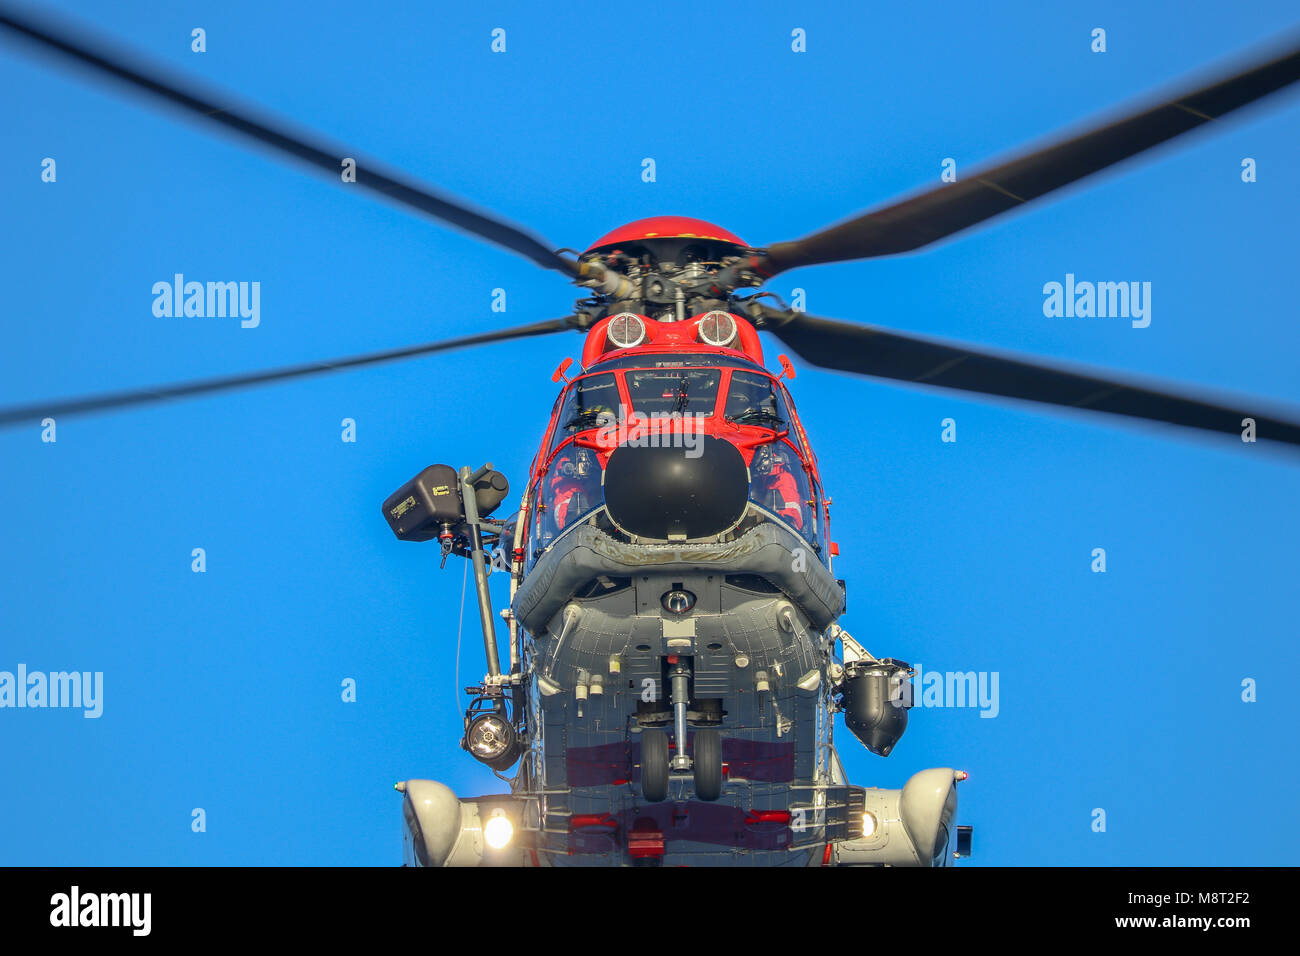 ALESUND, NORWAY - OCTOBER 24th, 2017: Airbus AS332 Super Puma rescue  helicopter in air. Operated by CHC helikopter service in Norway Stock Photo  - Alamy